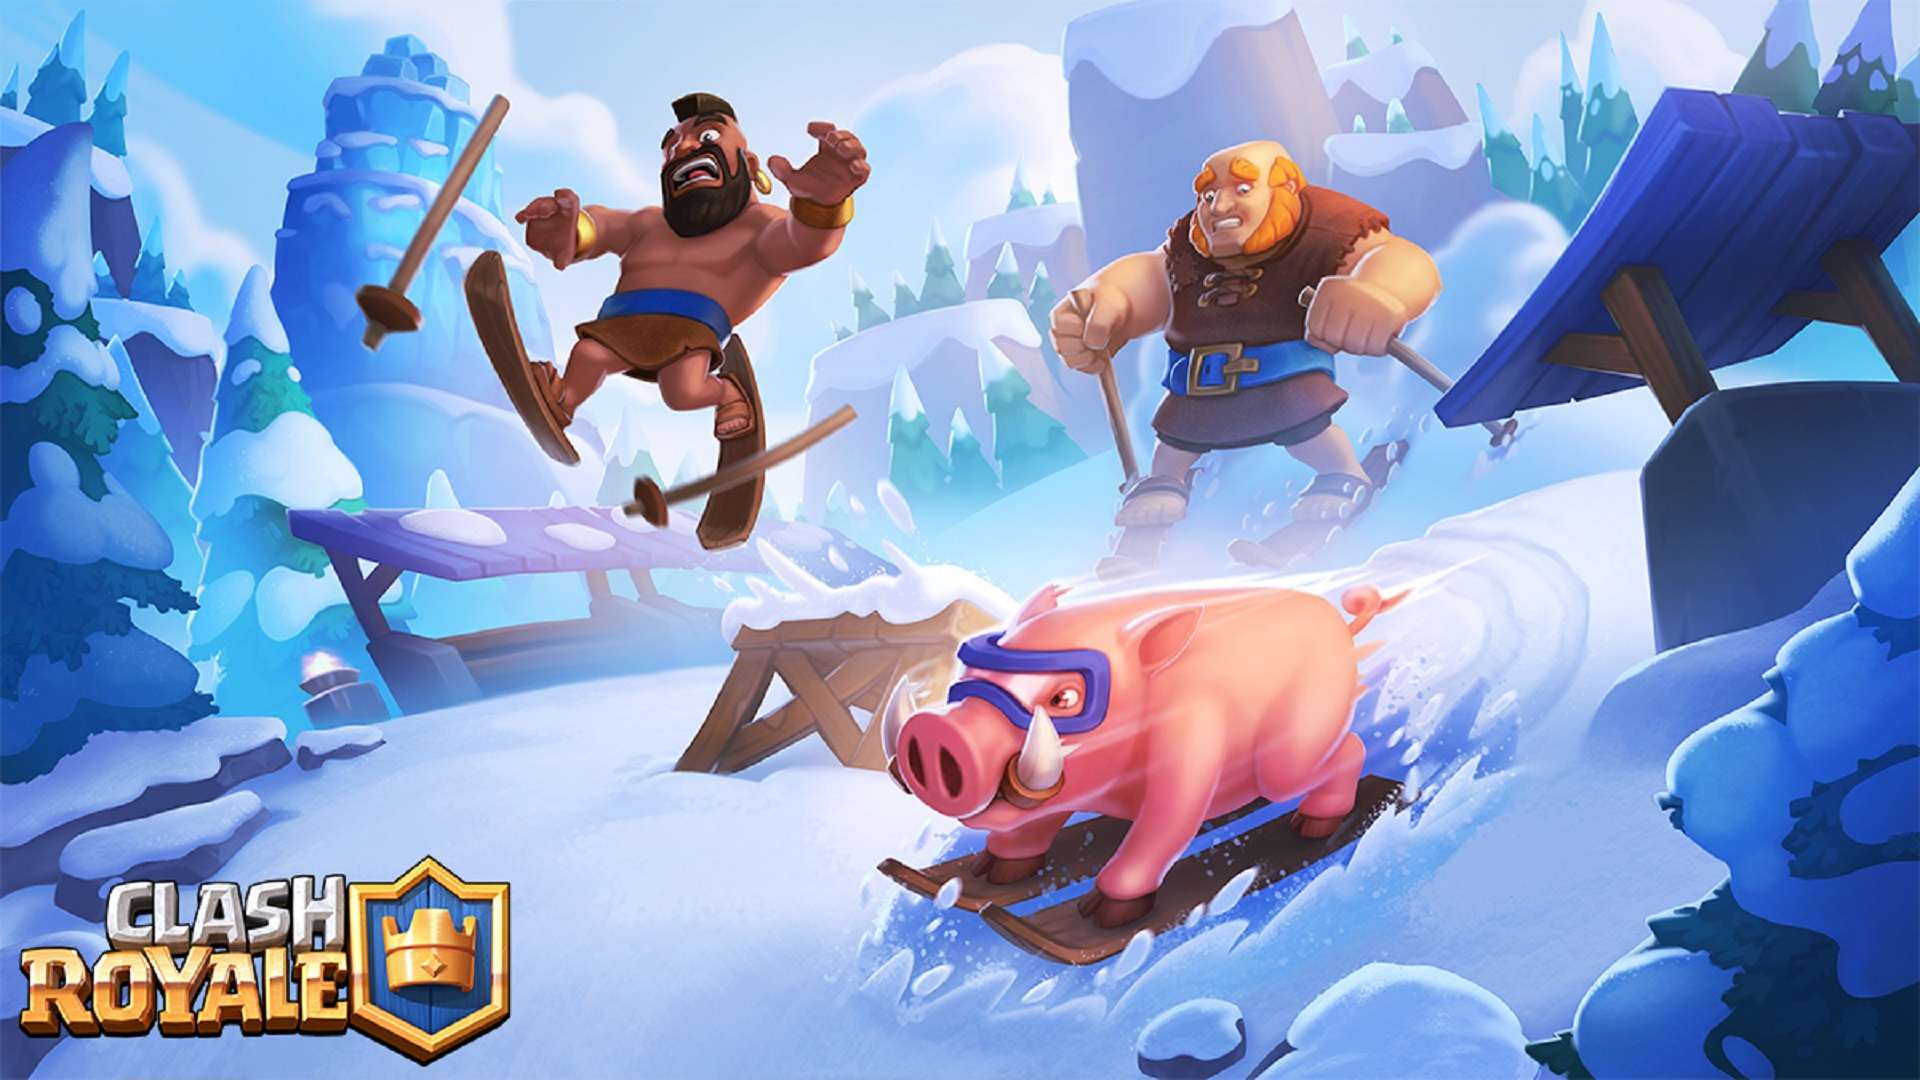 cover art for clash royale featuring the giant and the hog rider.